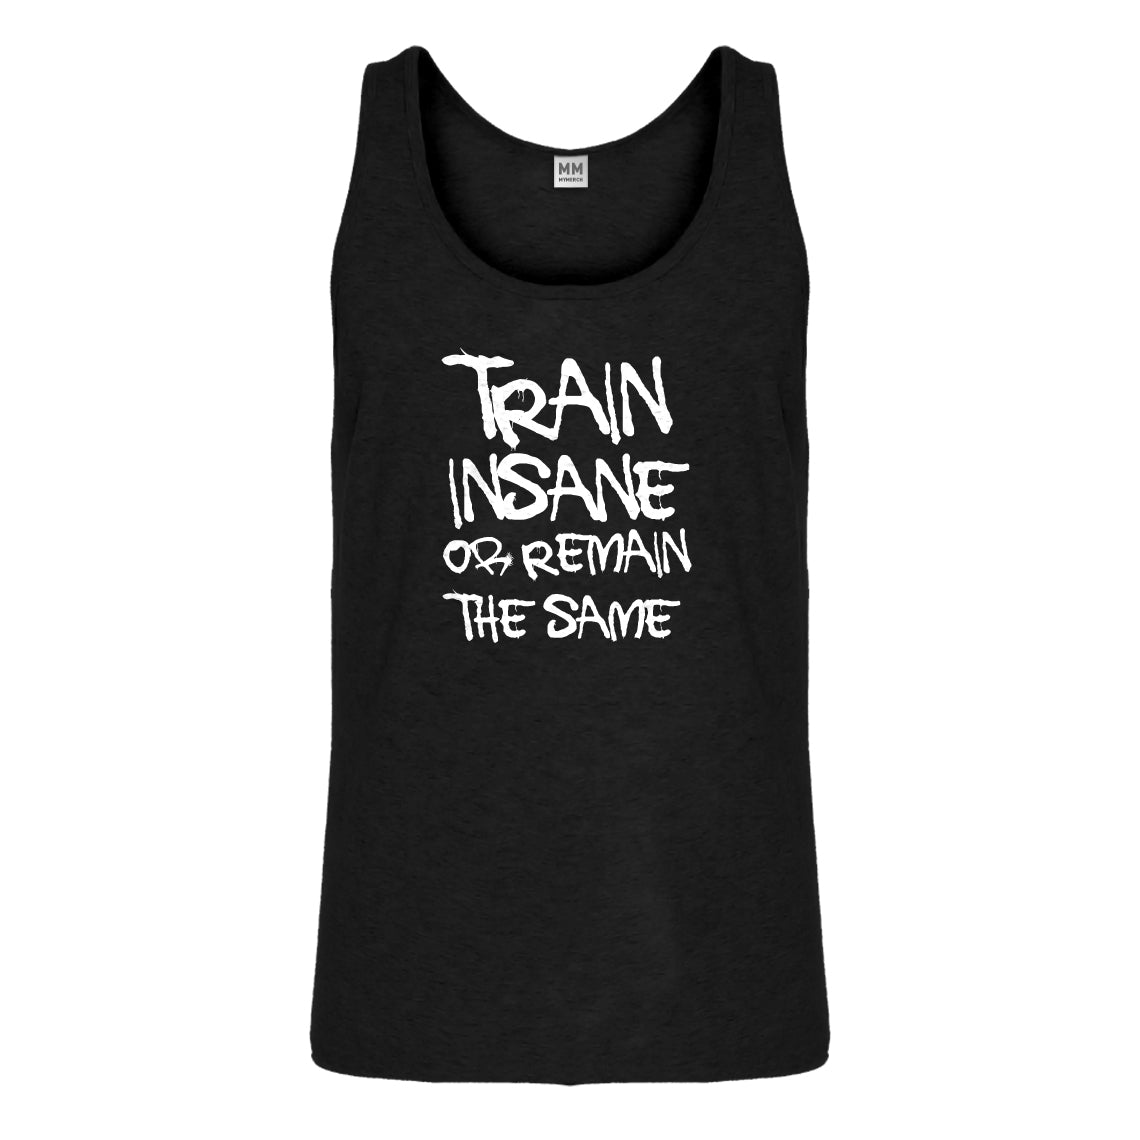 Tank Train Insane or Remain the Same Mens Jersey Tank Top